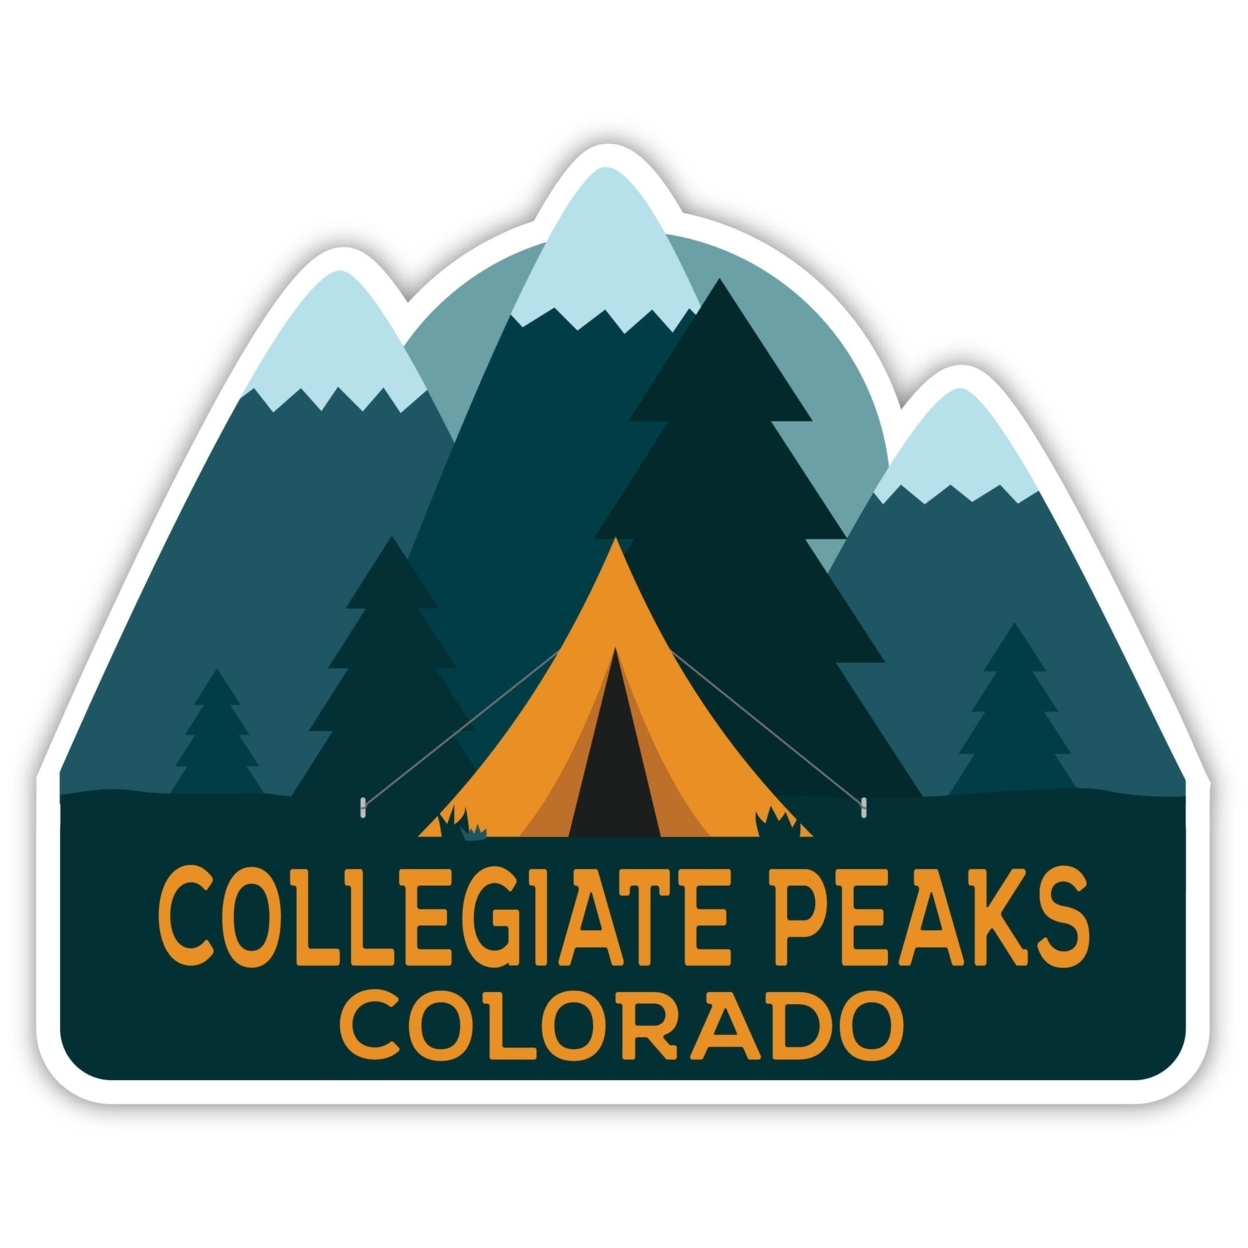 Collegiate Peaks Colorado Souvenir Decorative Stickers (Choose Theme And Size) - 4-Pack, 4-Inch, Great Outdoors